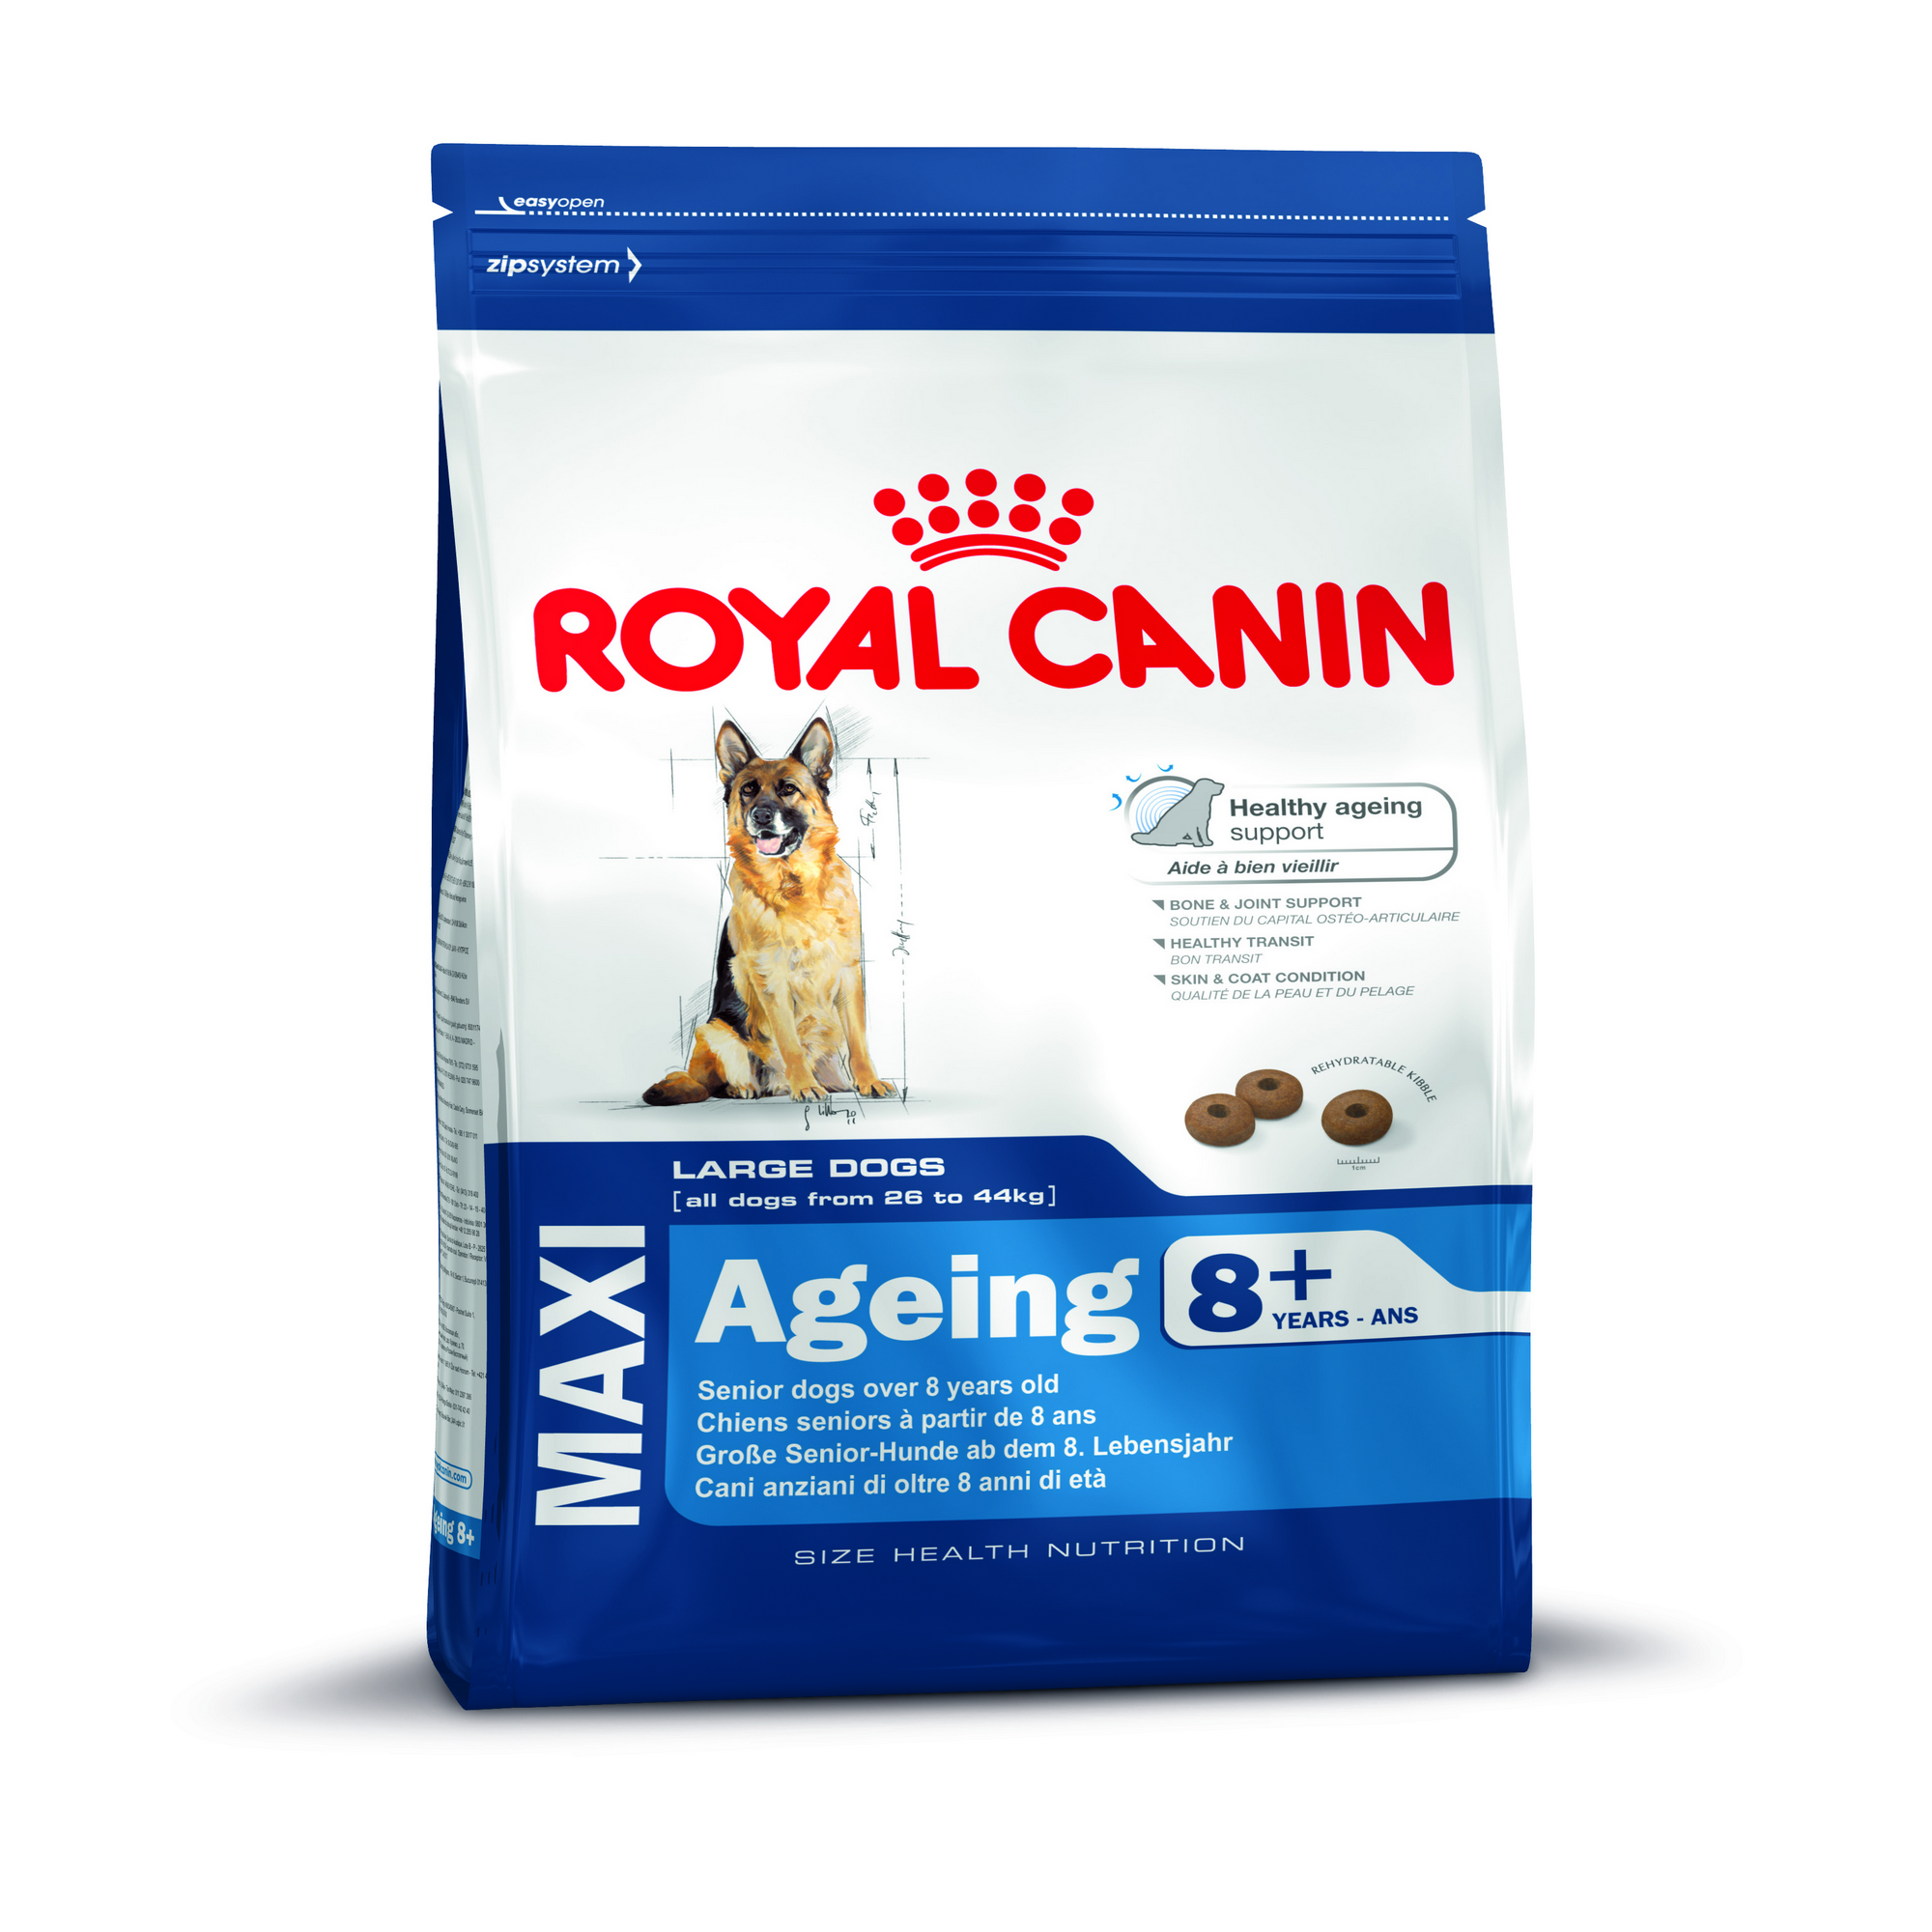 Royal Canin MAXI Ageing 8 3 Kg + product picture